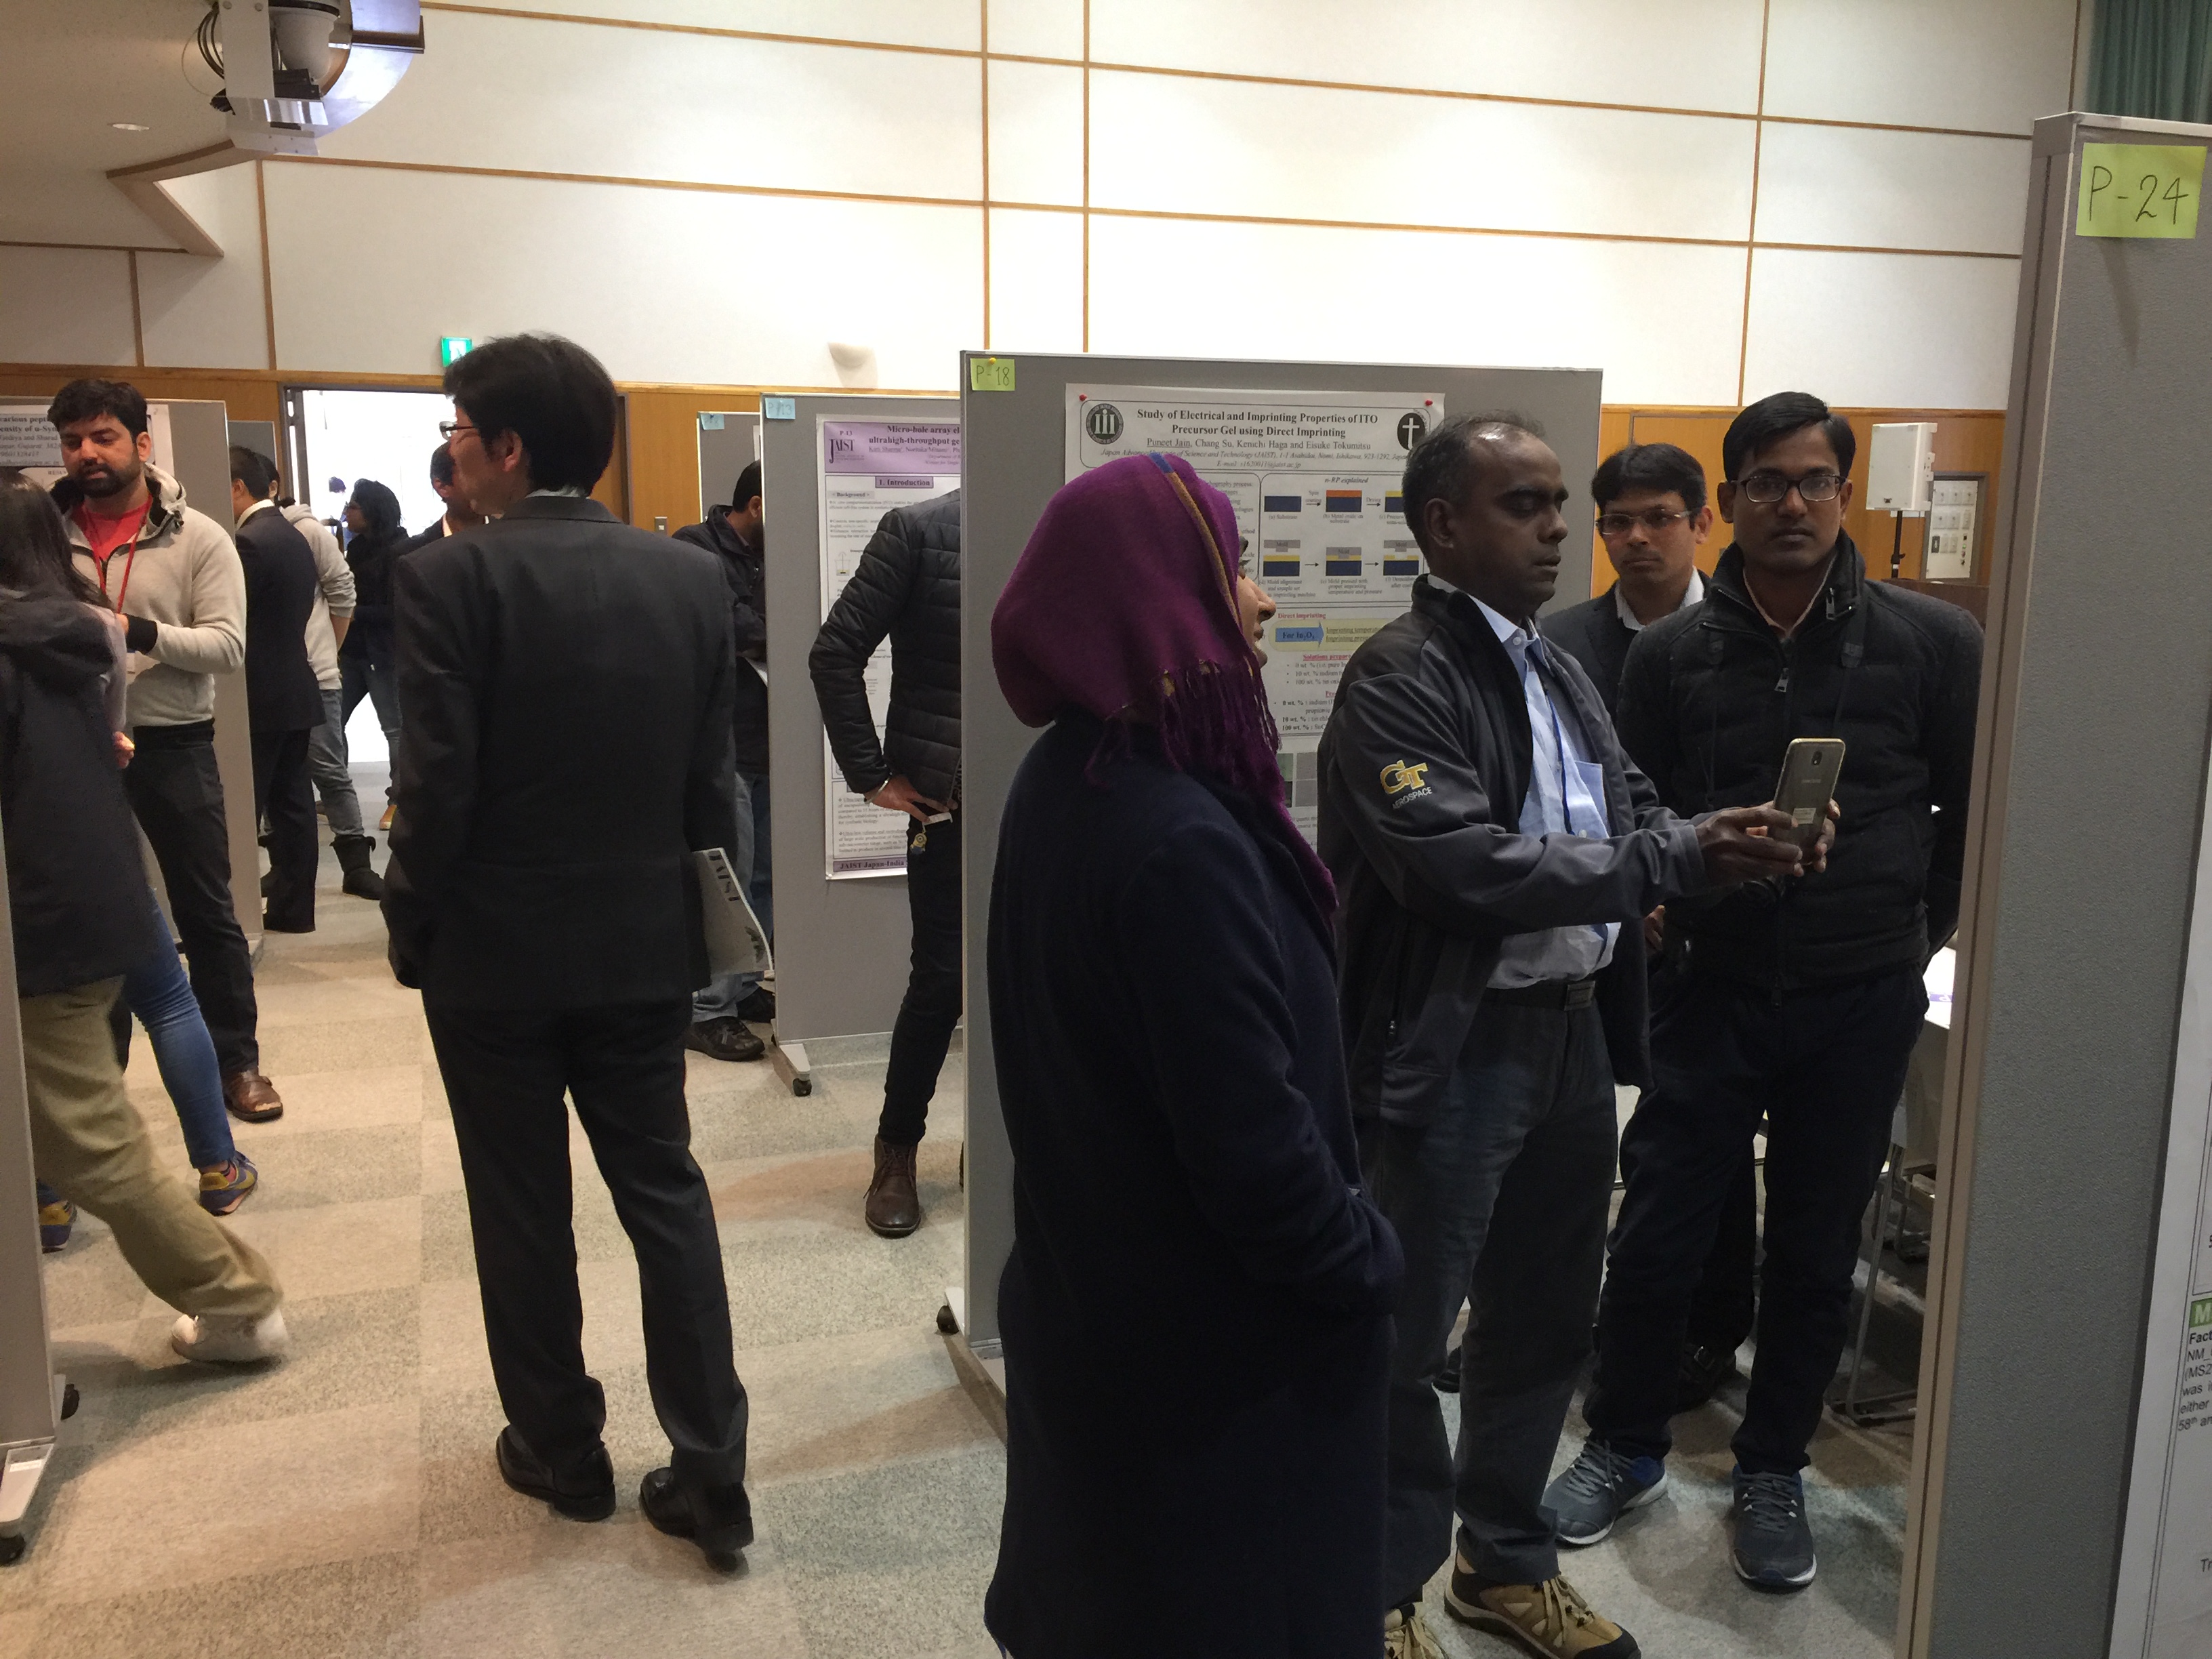 During the poster session